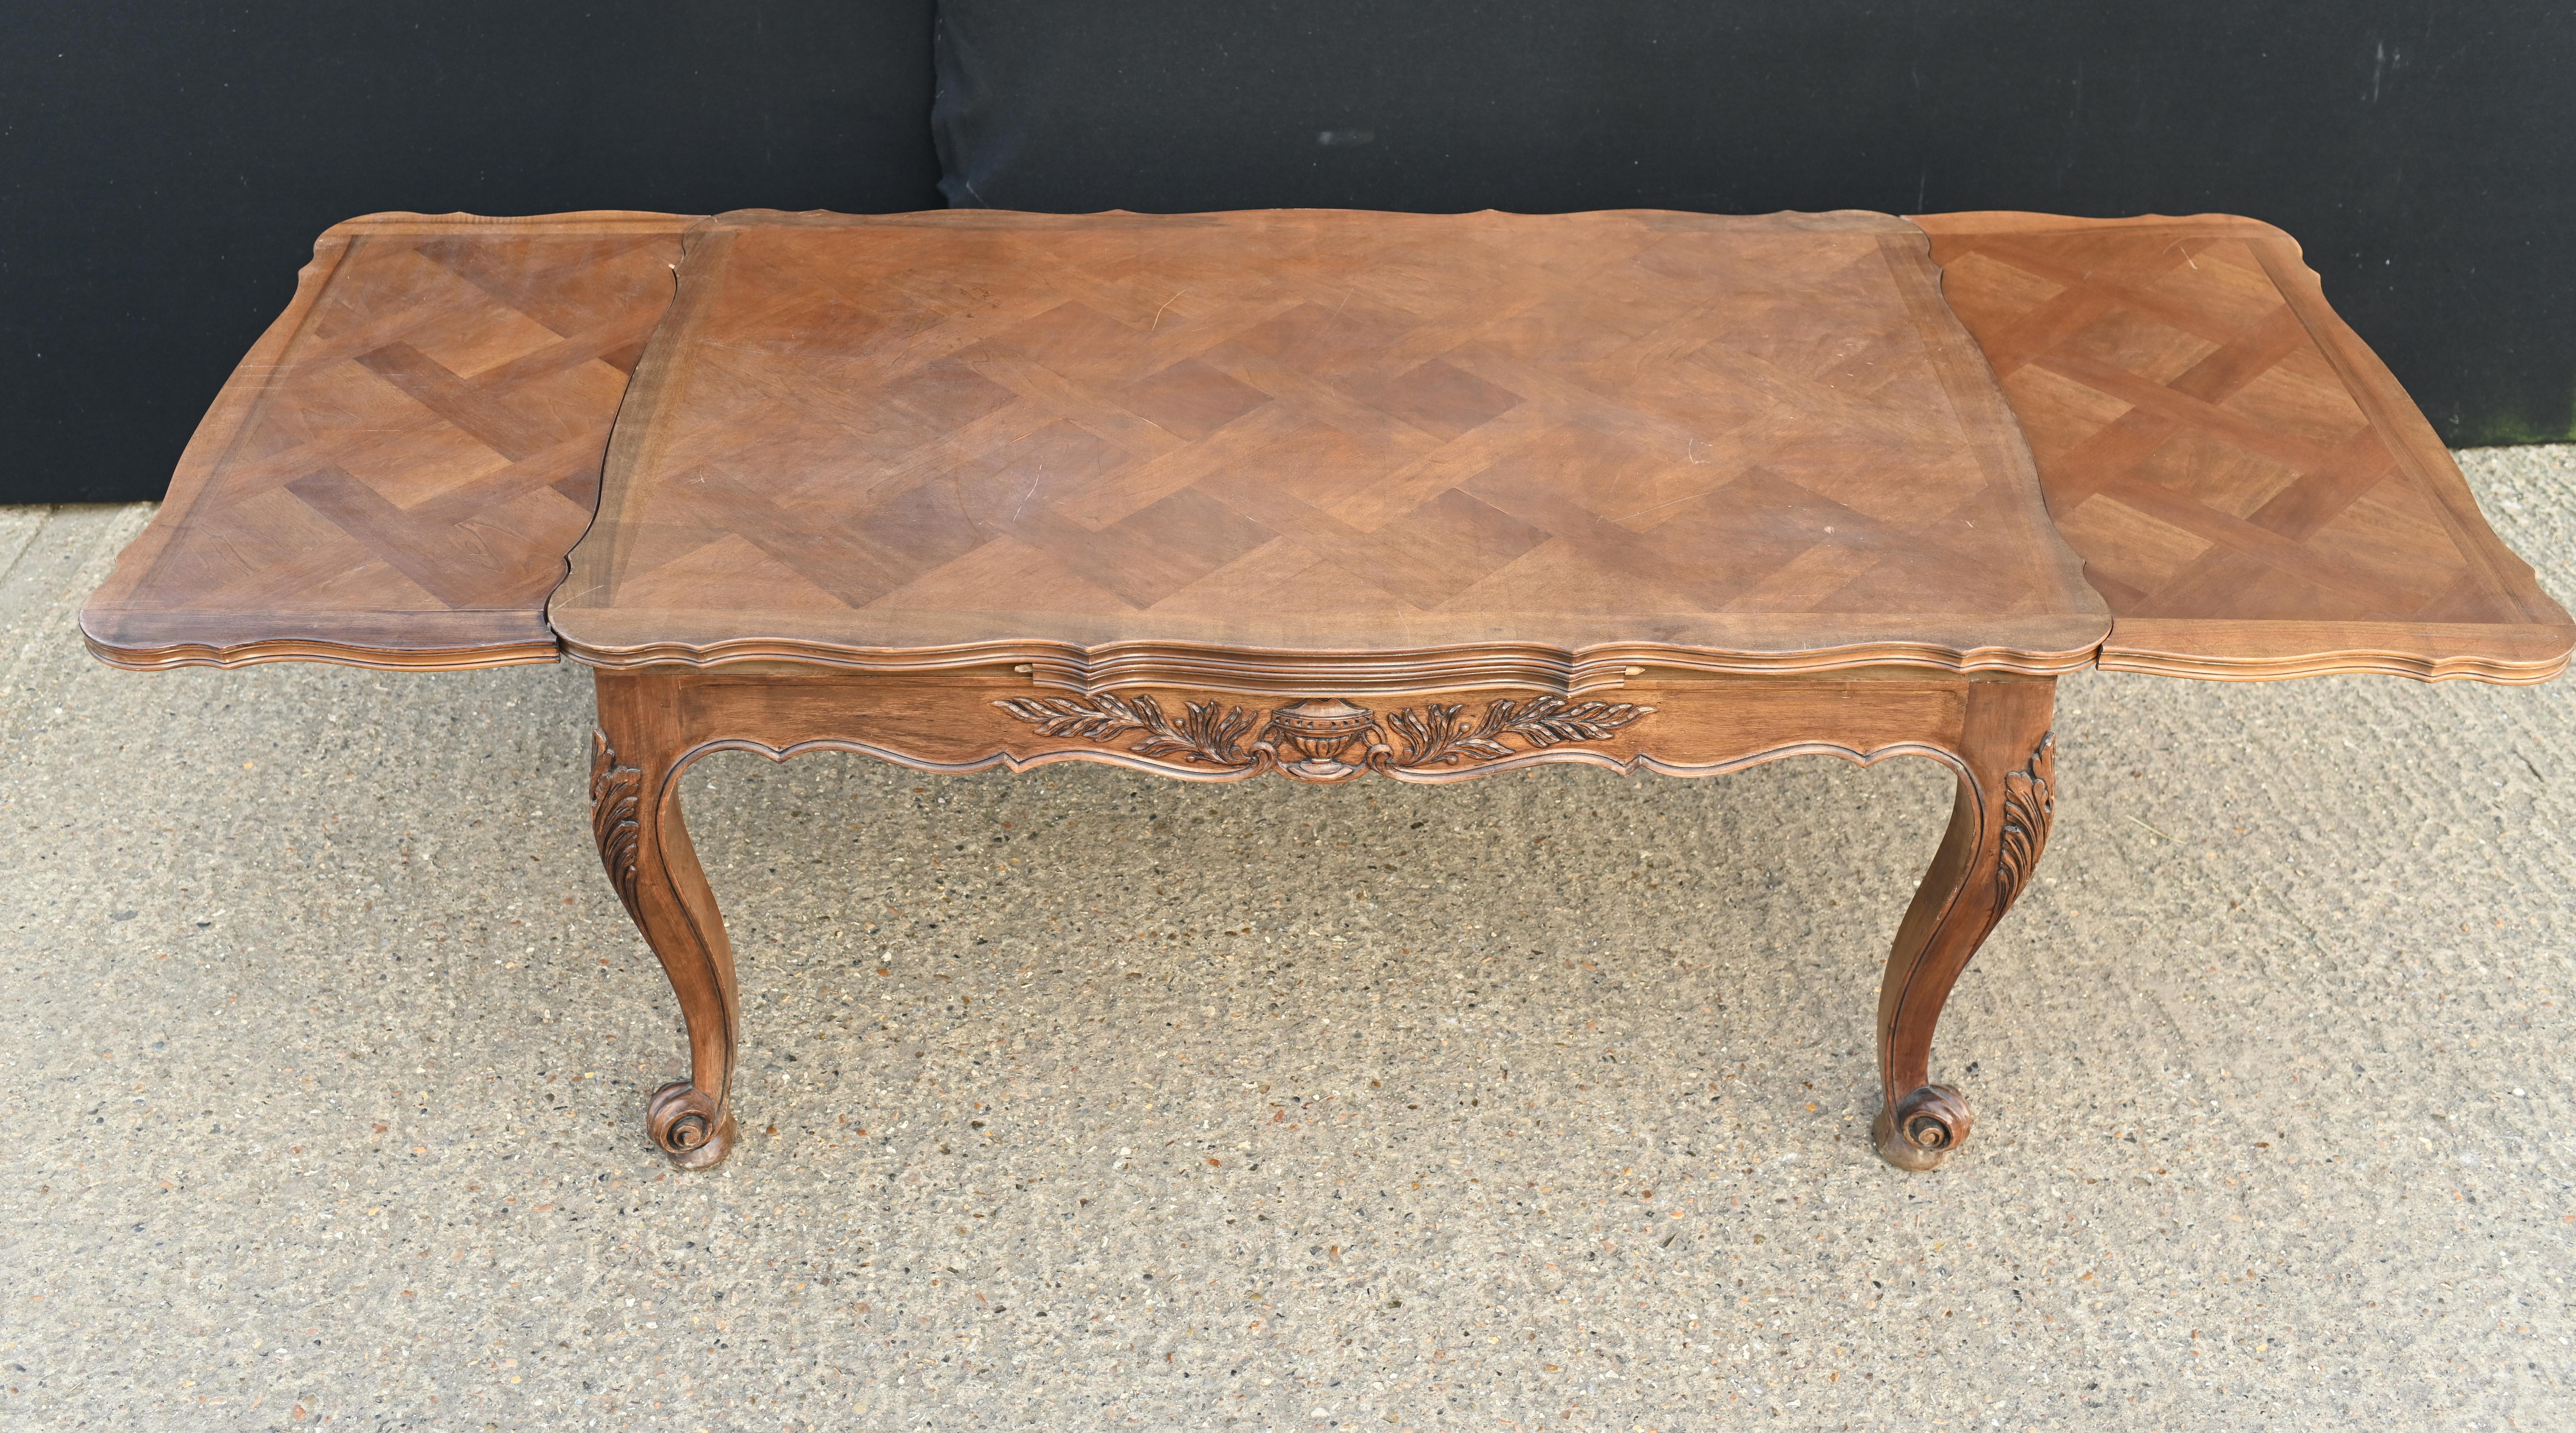 Elegant French provincal extending dining table
Hand carved details to the leg and apron
Also features intricate parquetry designs on the top
Opens out via pullout sections at either end
circa 1920
Bought from a dealer on Marche Biron at Paris